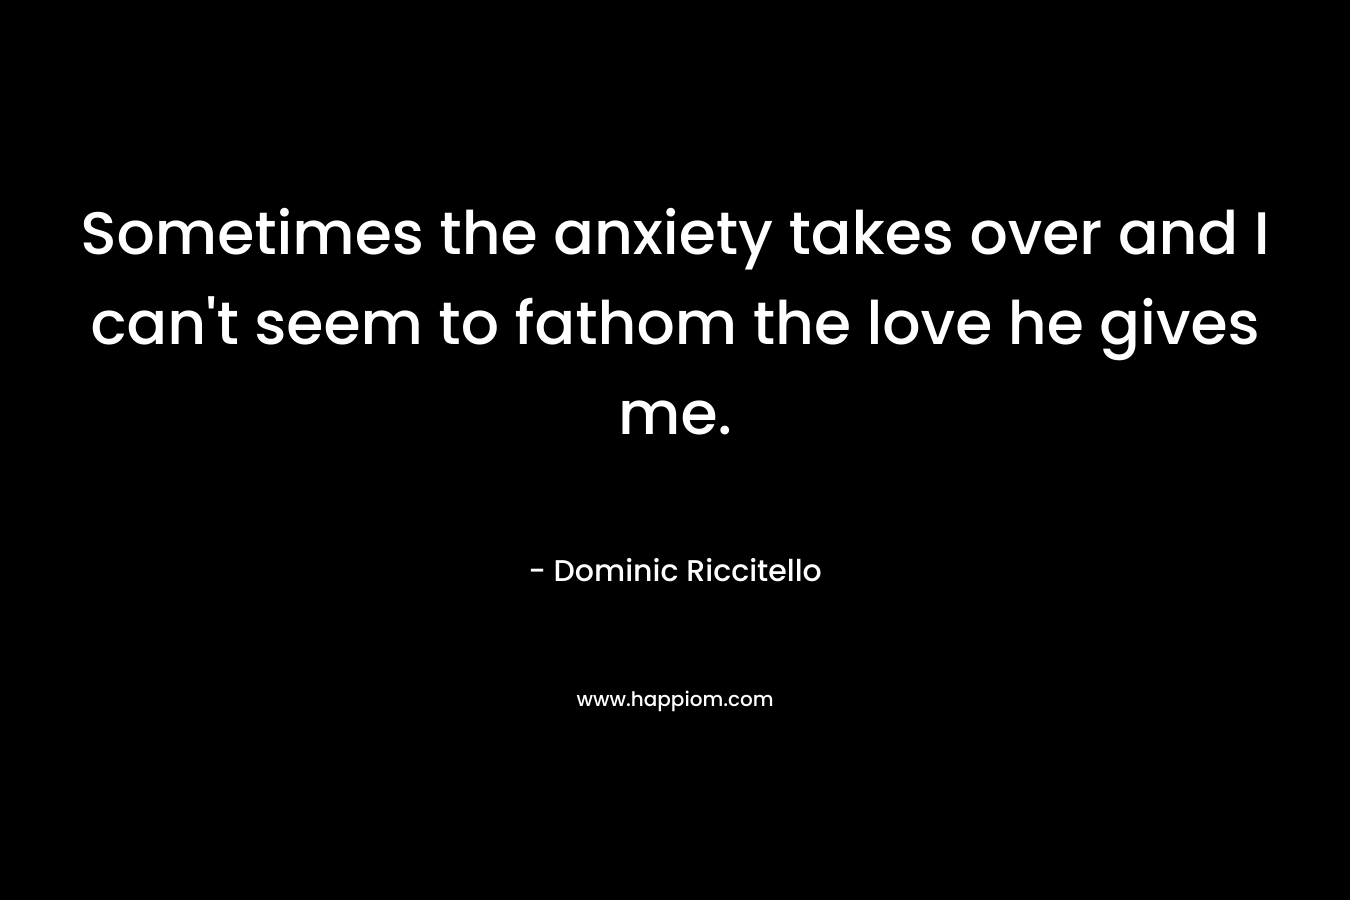 Sometimes the anxiety takes over and I can’t seem to fathom the love he gives me. – Dominic Riccitello